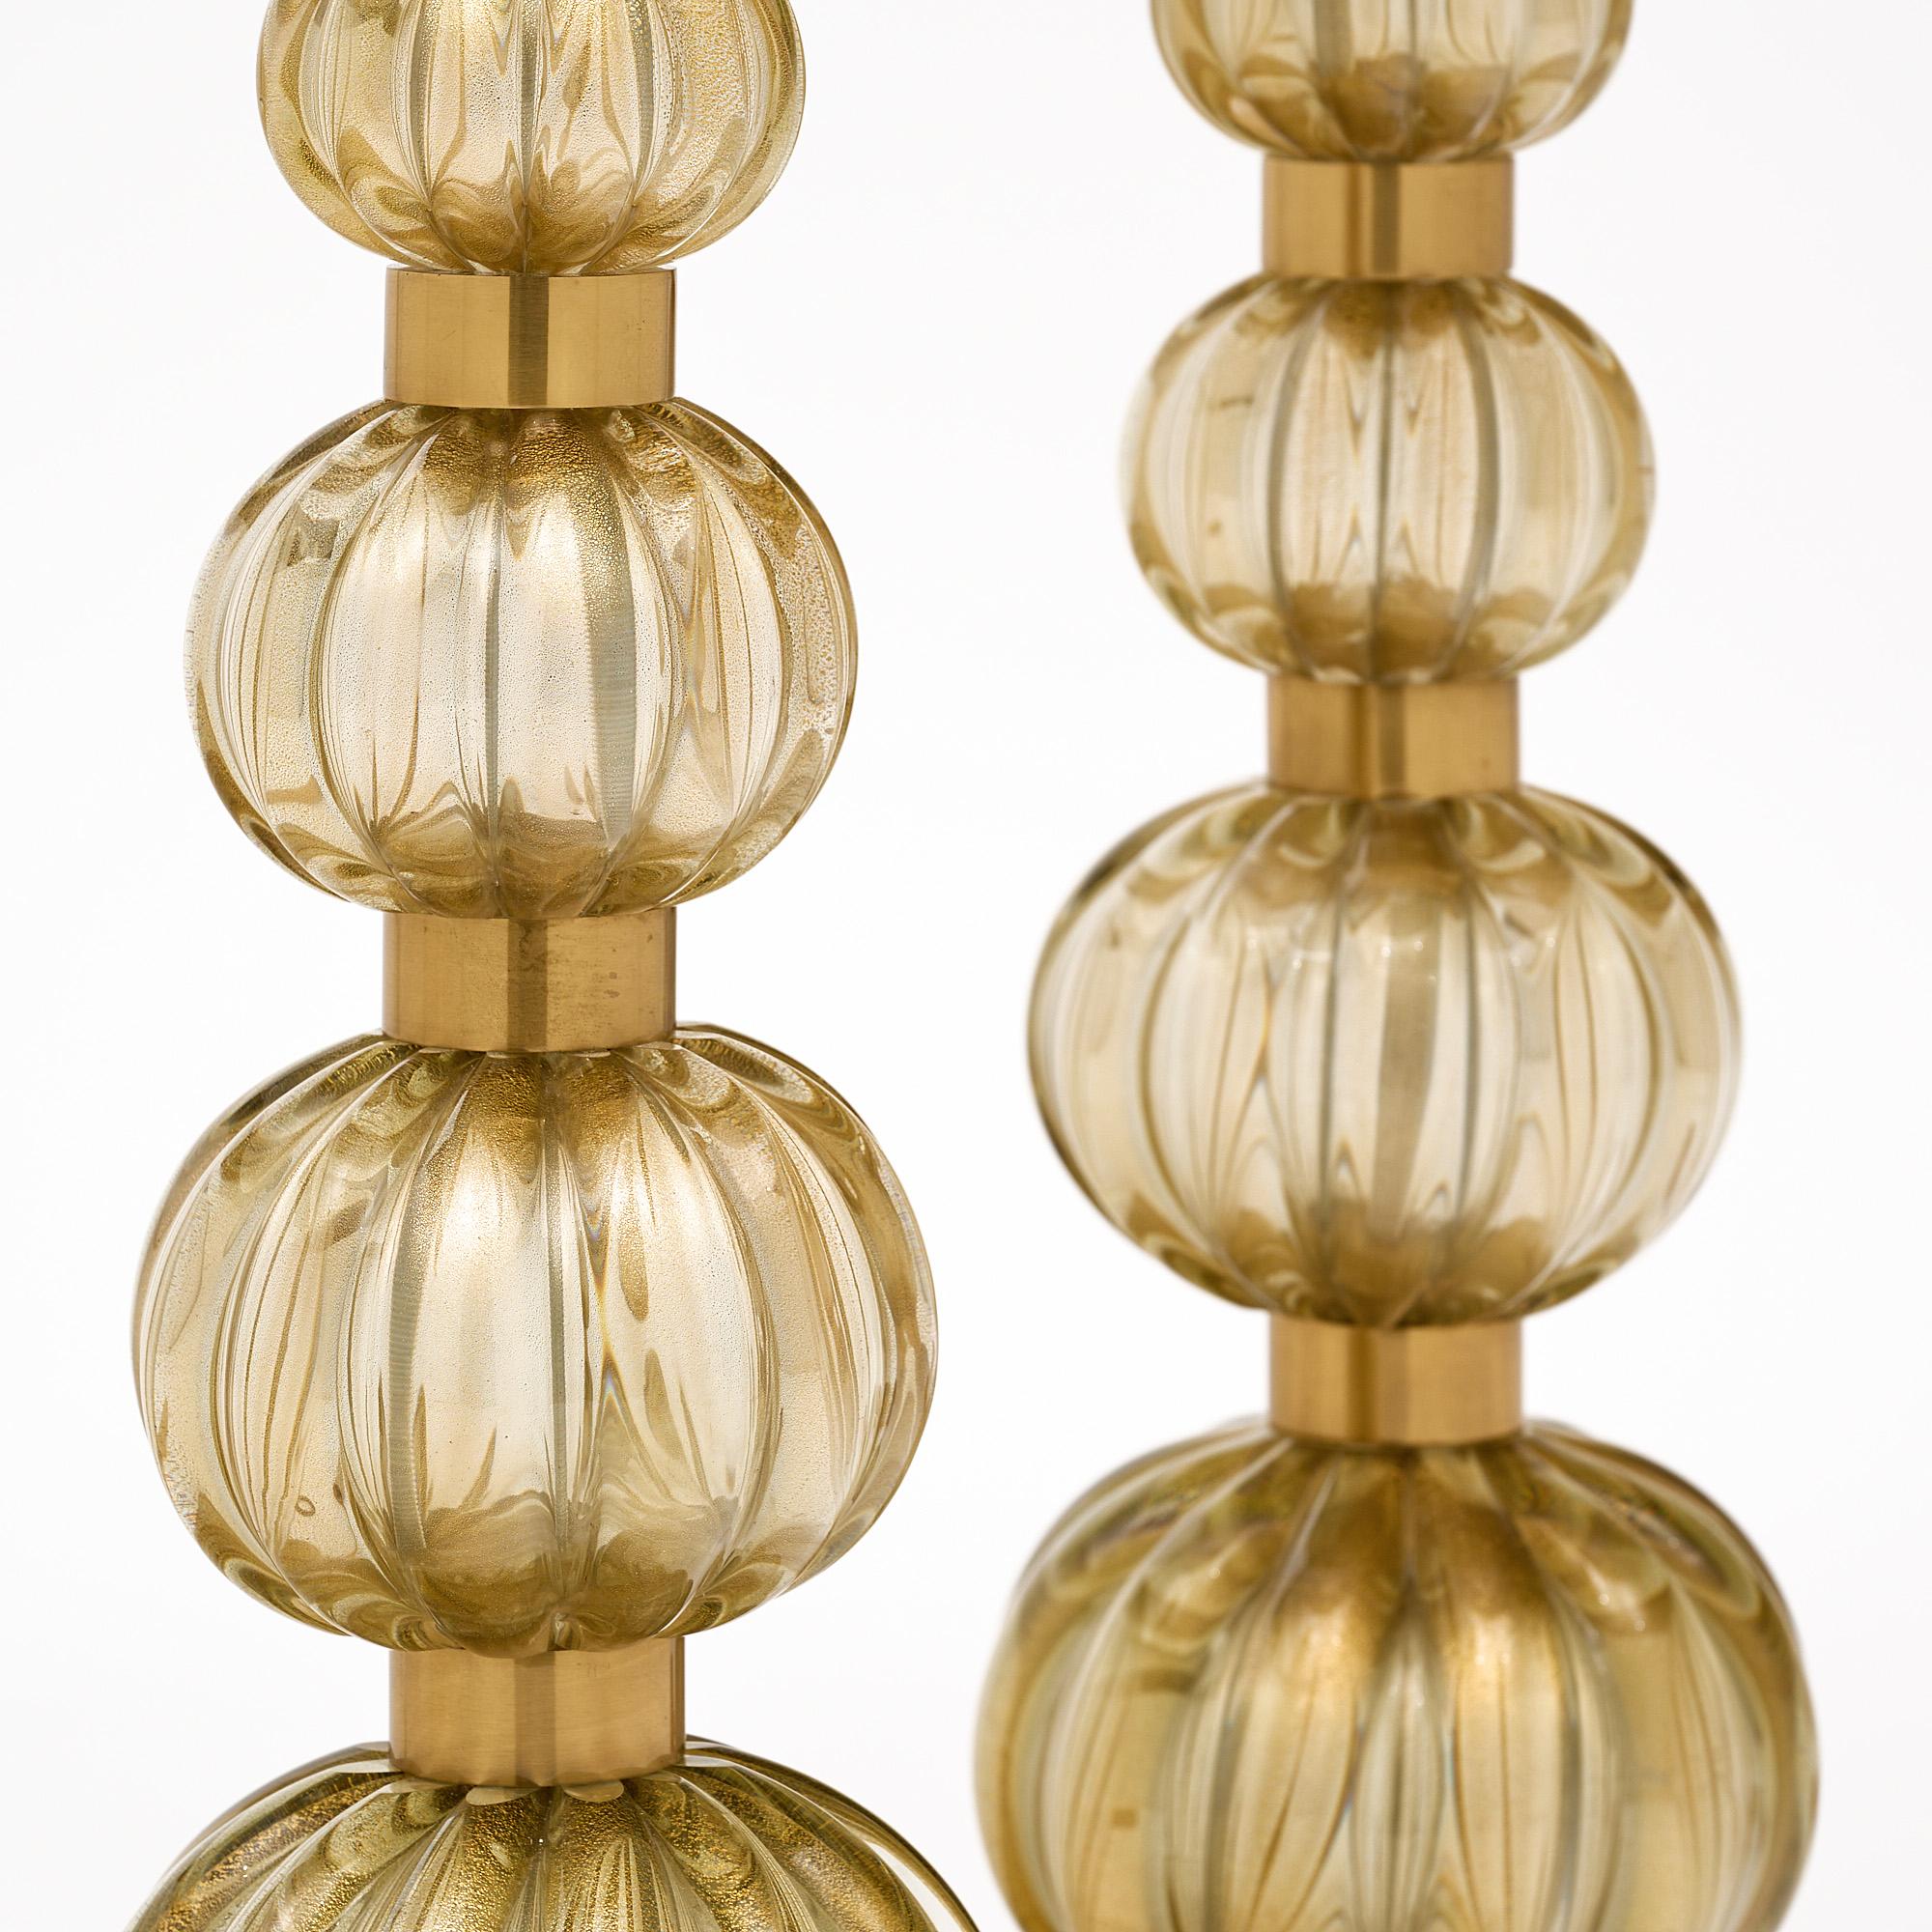 Pair of Murano glass lamps, from the island of Murano next to Venice, Italy. The smoked glass ridged spheres were crafted in the Avventurina technique with 24 carat gold powder fused within the blown glass components. These glass lamps feature five